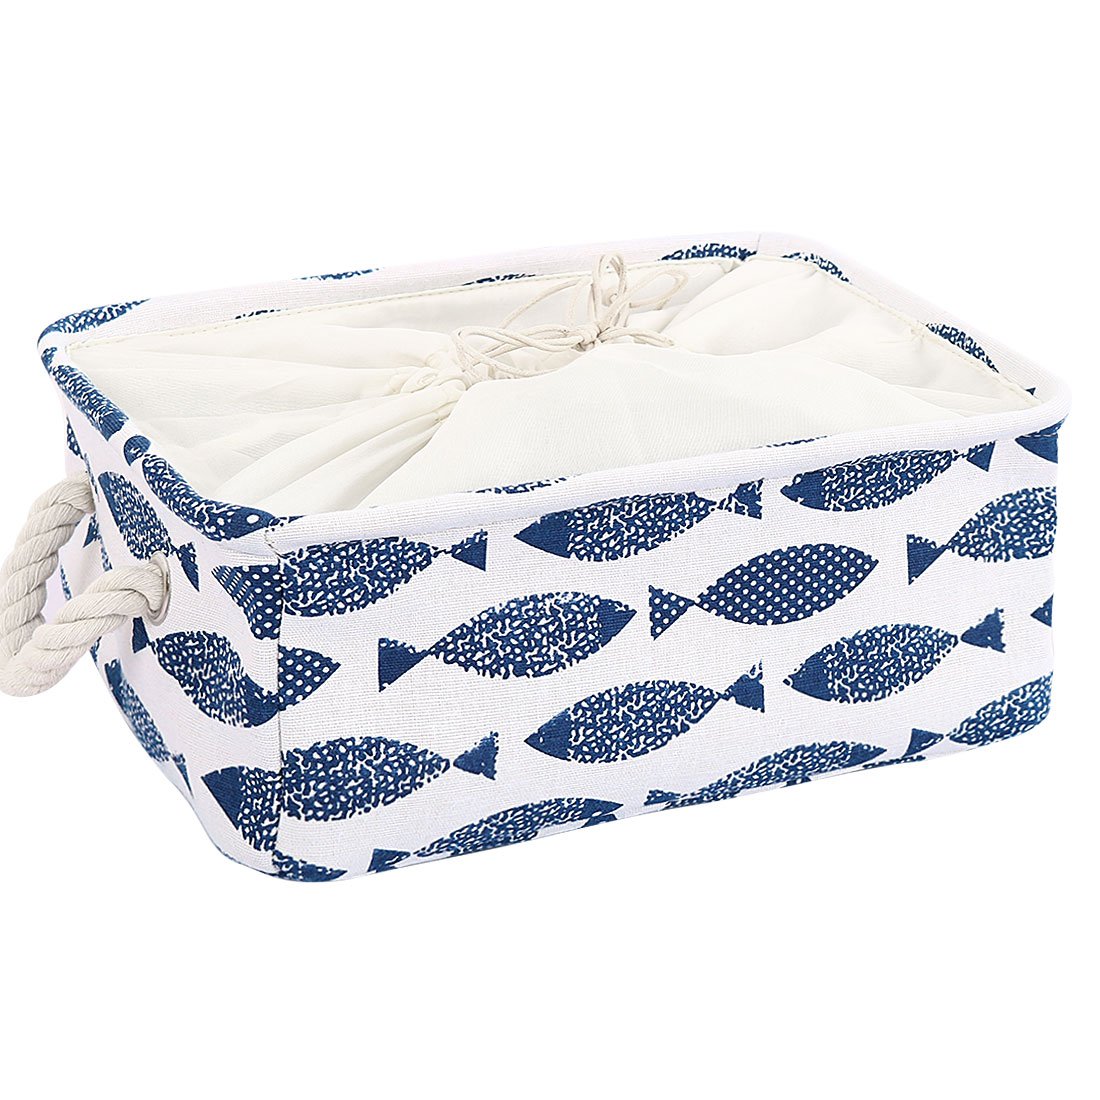 uxcell Collapsible Laundry Baskets with Handles,Fabric Storage Bins Basket for Toy Clothes Towel Organizer for Home Closet,Blue Fish (Small - 12.2 x 8.3 x 5.1 '')